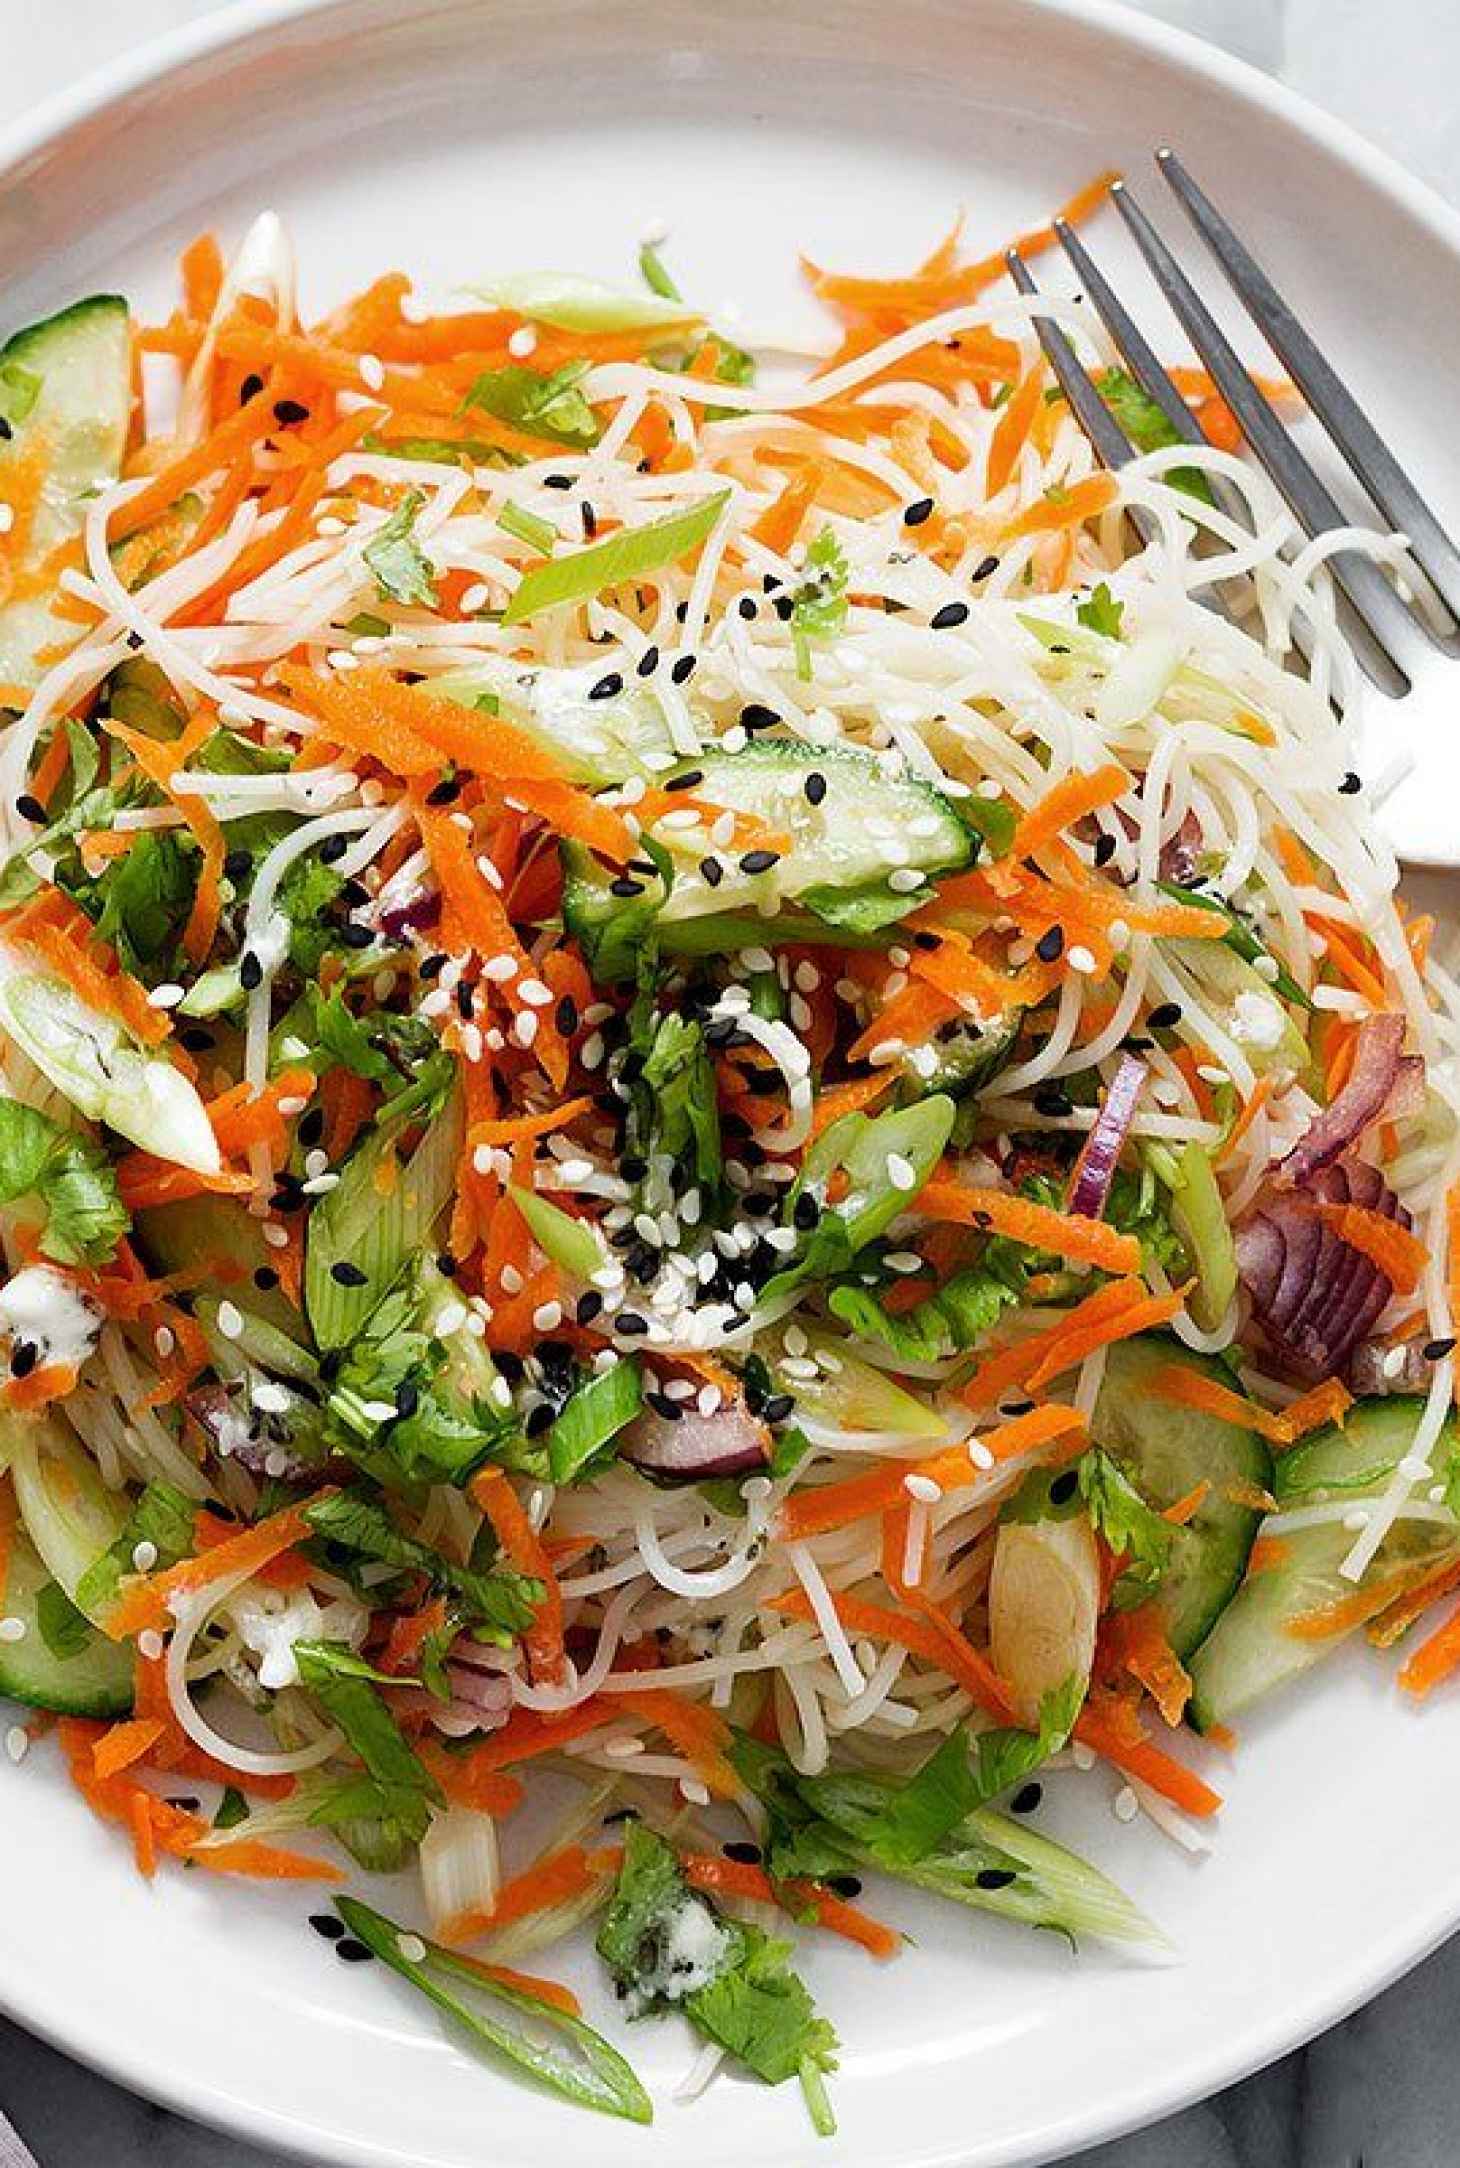 Spring Roll Noodle Salad - #recipe by #eatwell101 - https://www.eatwell101.com/noodle-salad-recipe